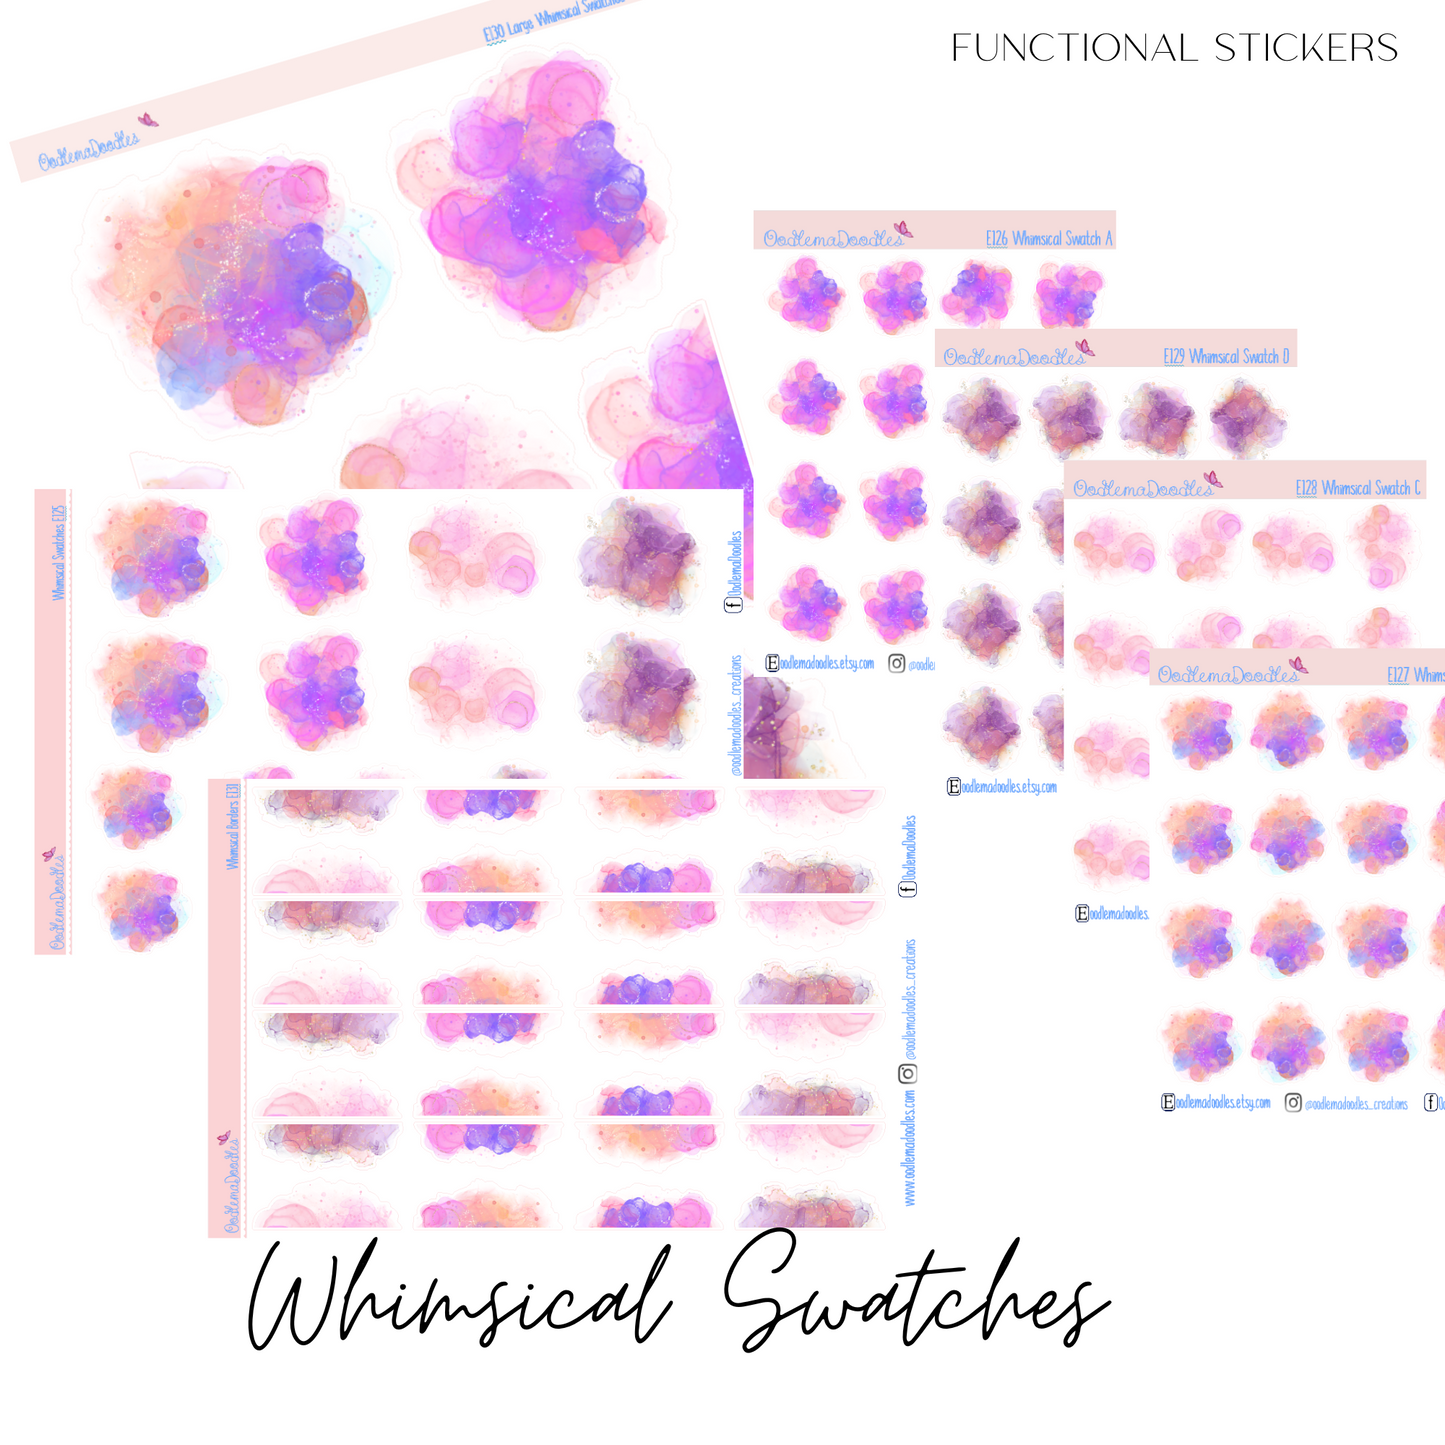 Whimsical Watercolour Swatches